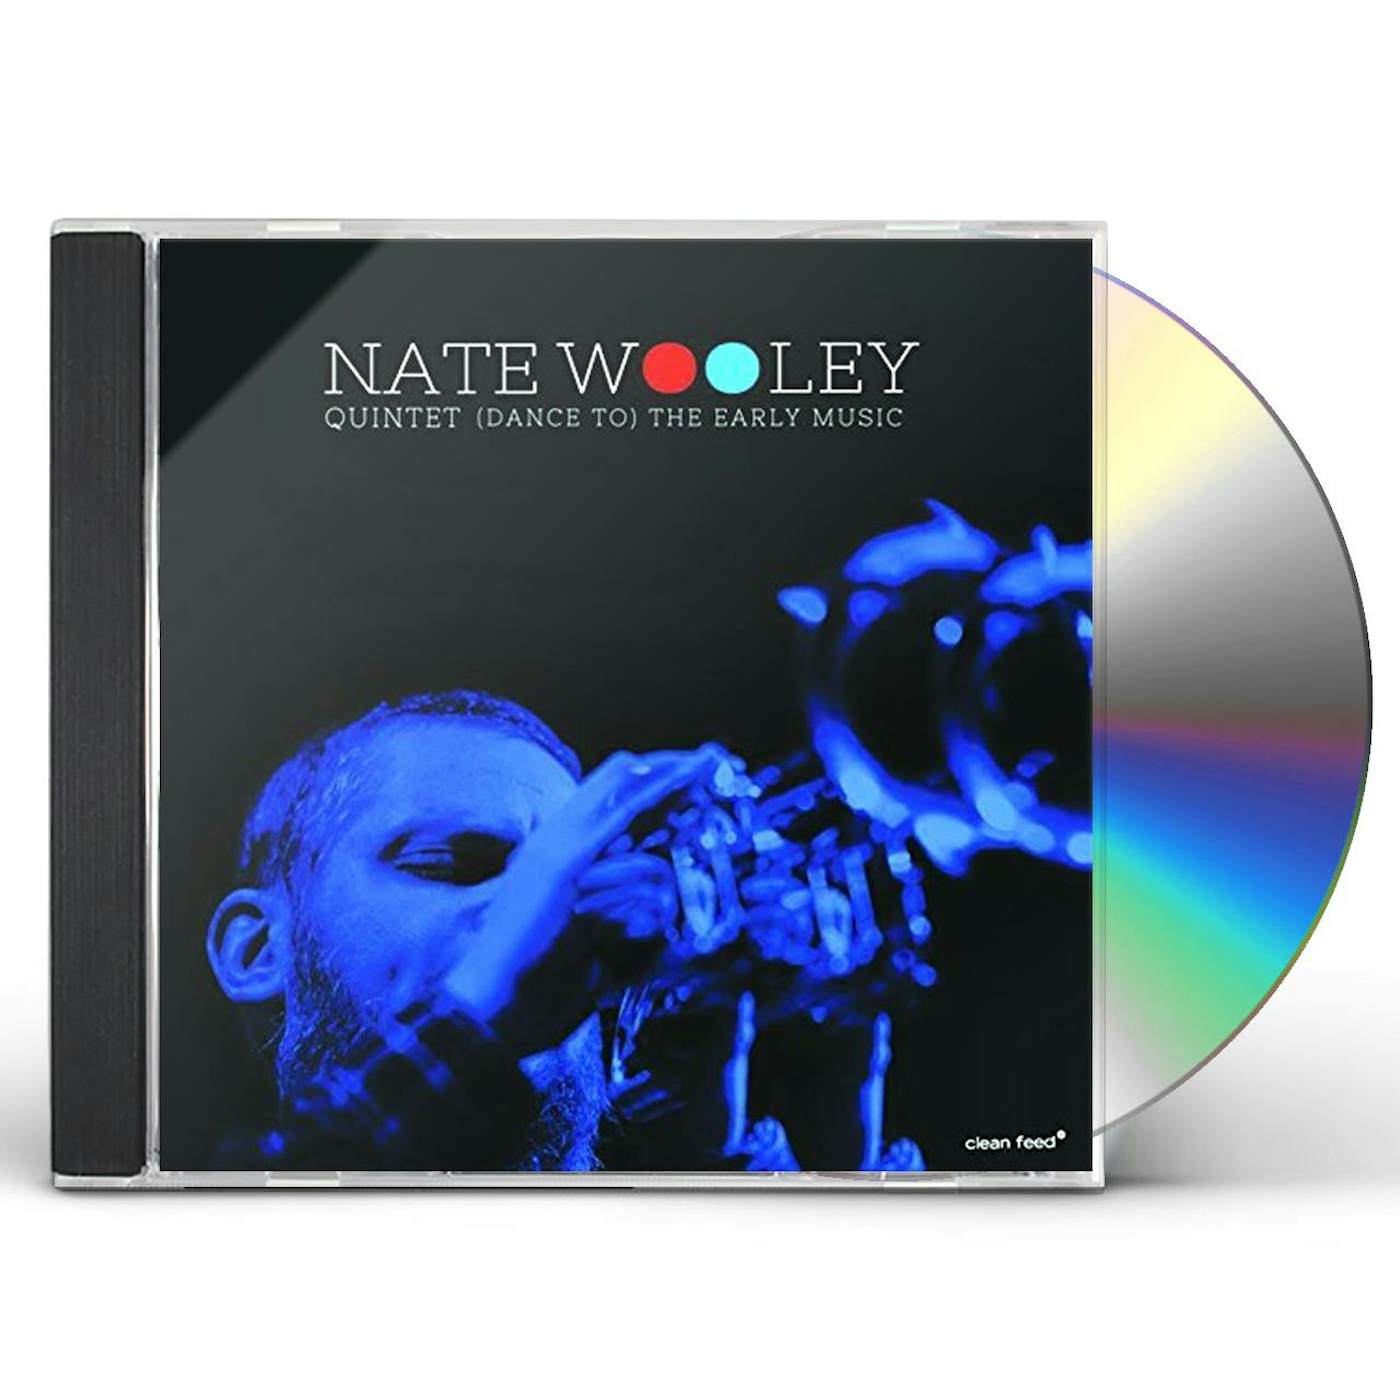 Nate Wooley 98332 (DANCE TO) THE EARLY MUSIC CD